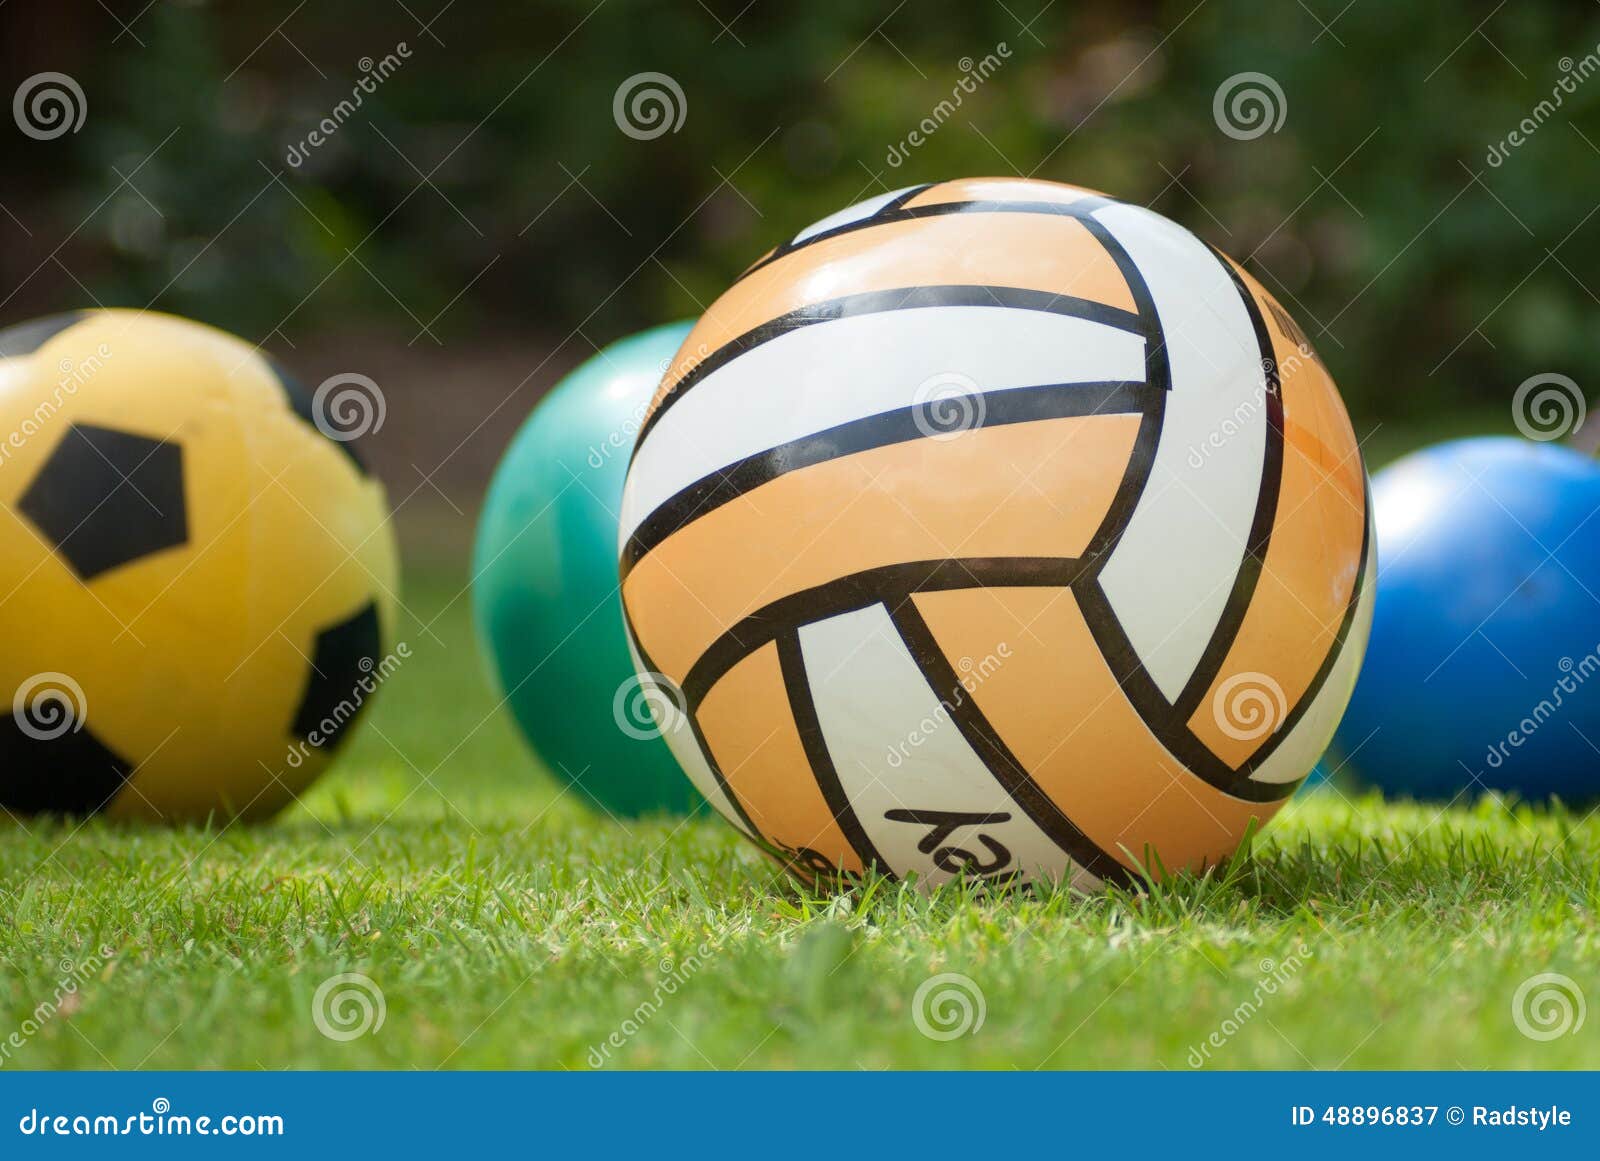 Collection of Four Balls in Grass Stock Image - Image of tennis, kick ...